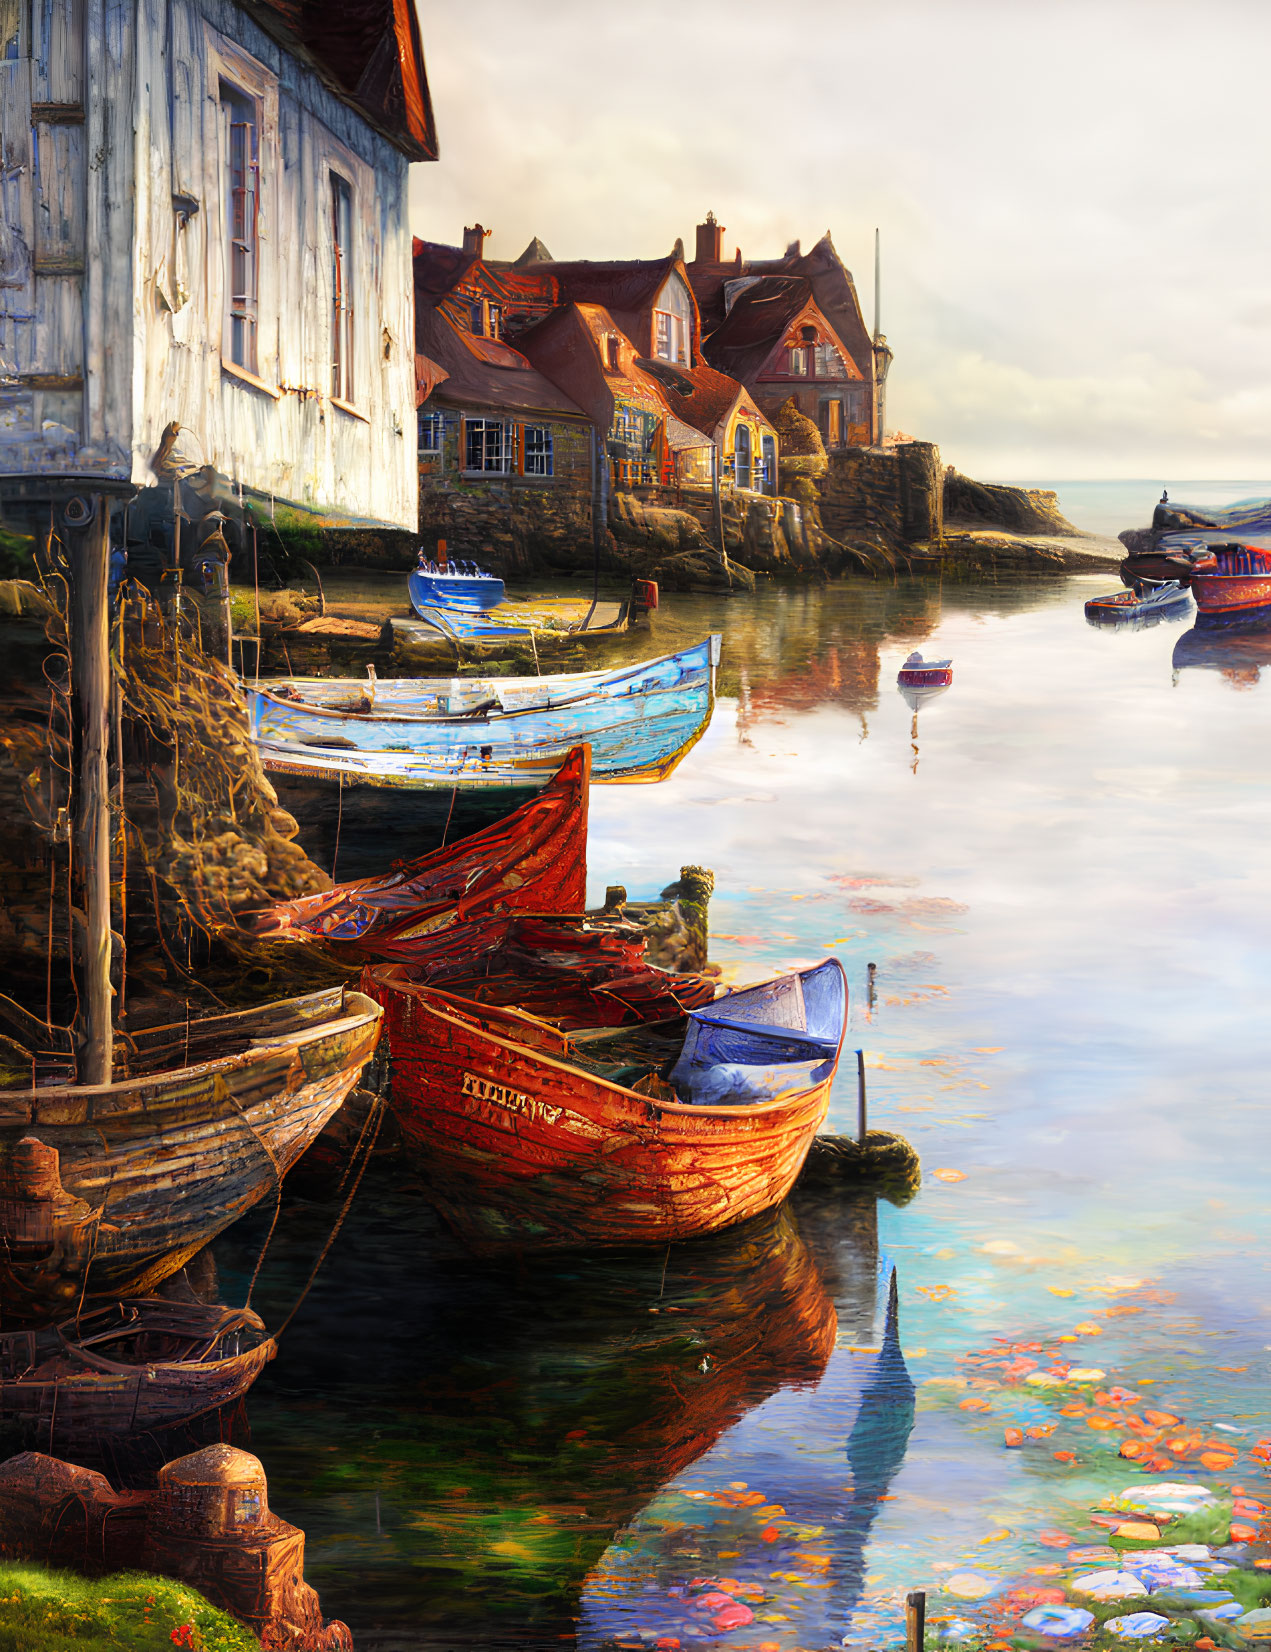 Tranquil harbor with colorful boats, white shack, red-roofed houses, and lily